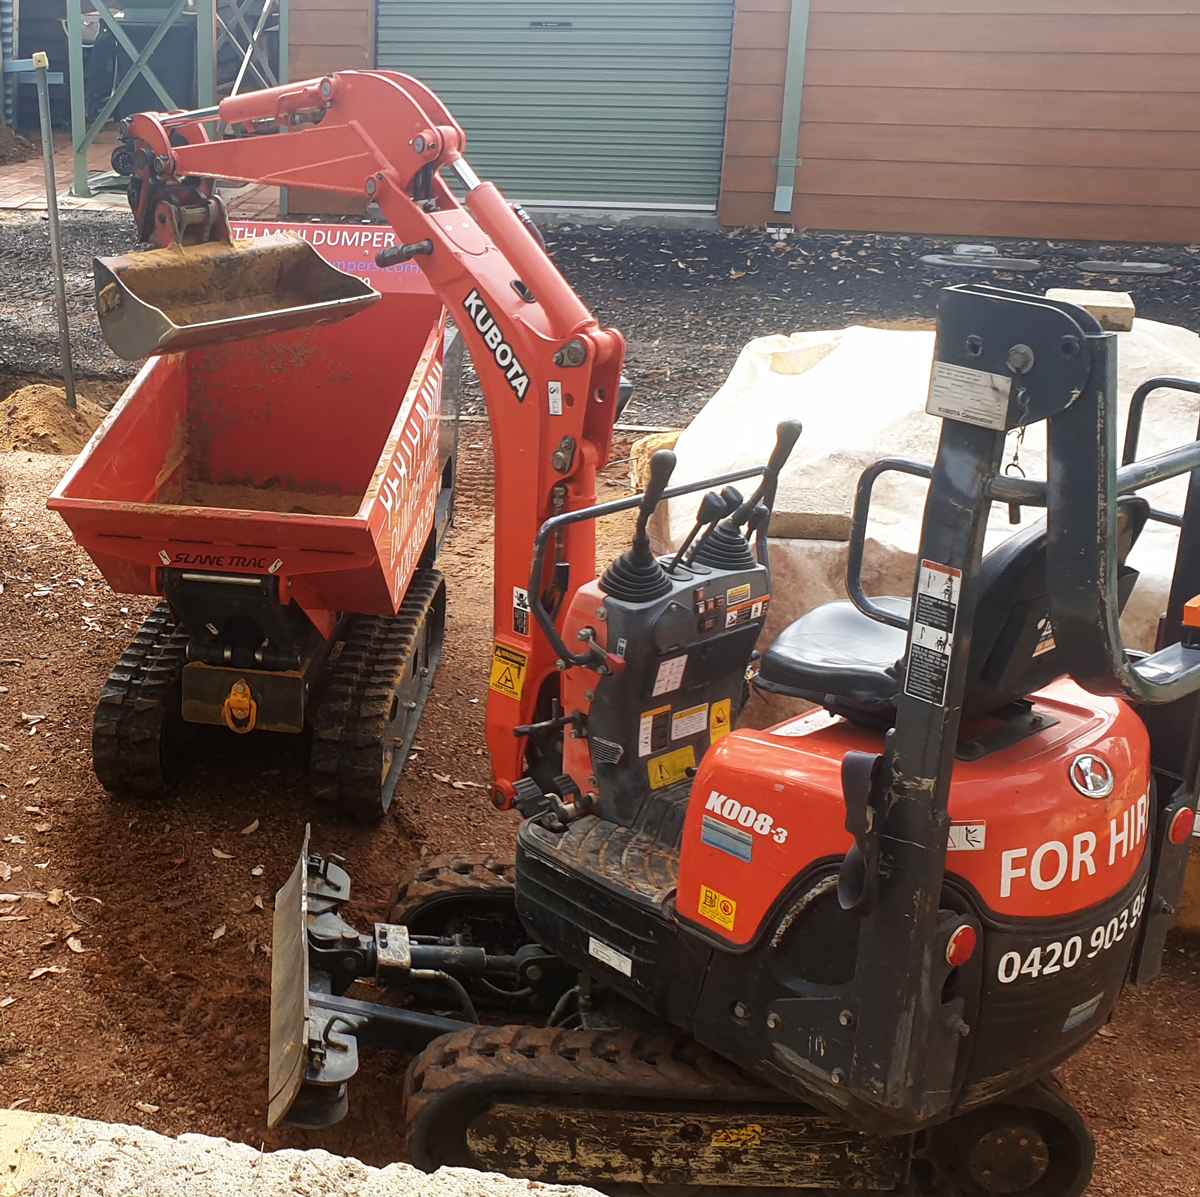 Keep the site safe and tidy with a mini dumper